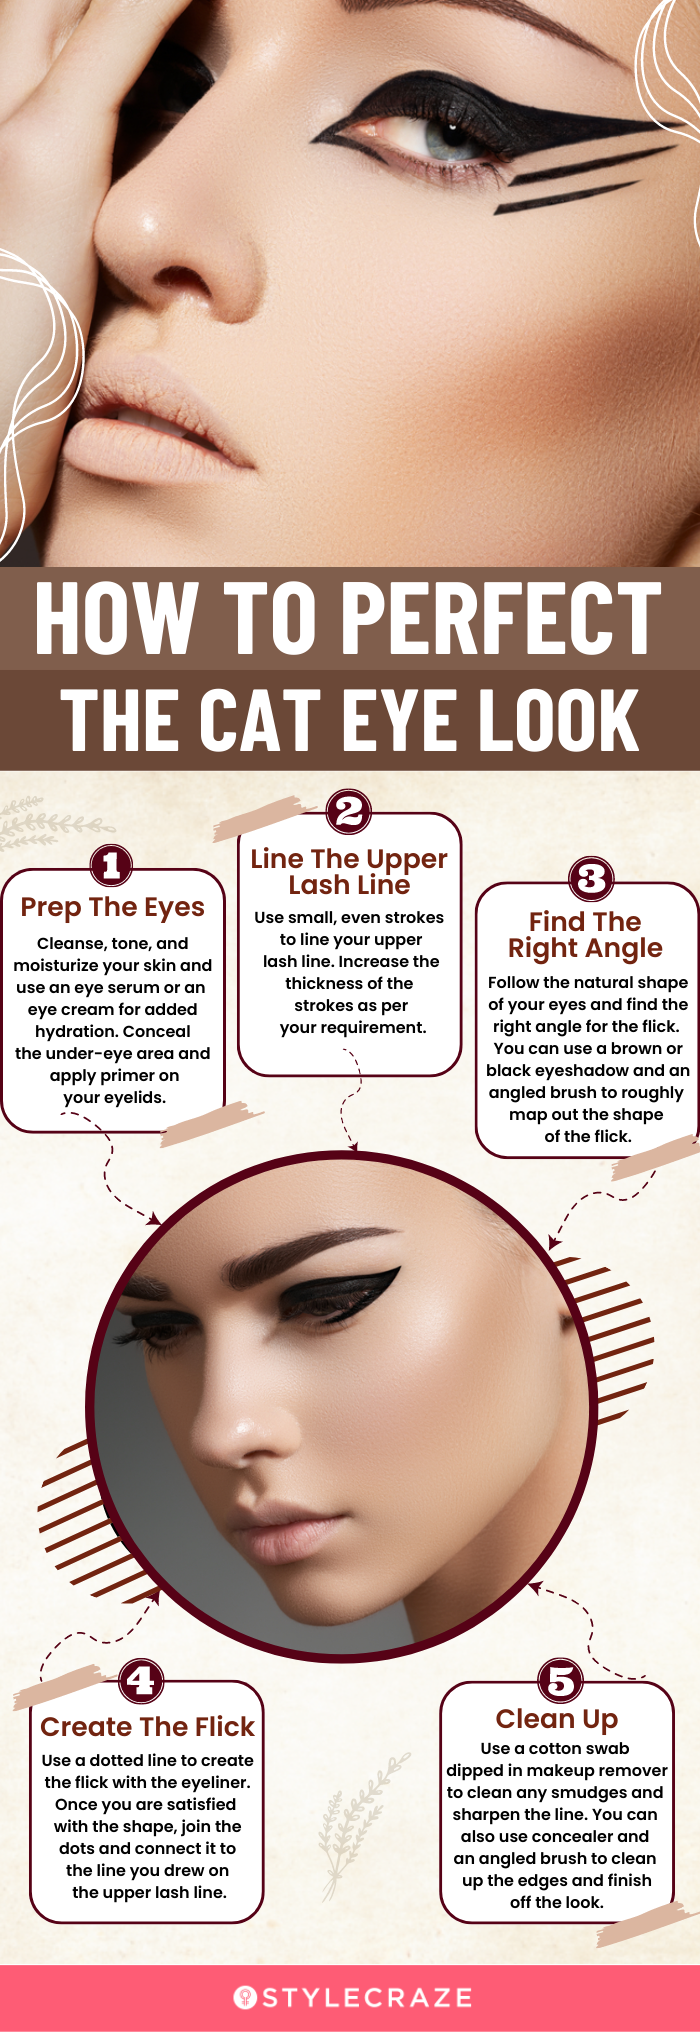 how to perfect the cat eye look (infographic)